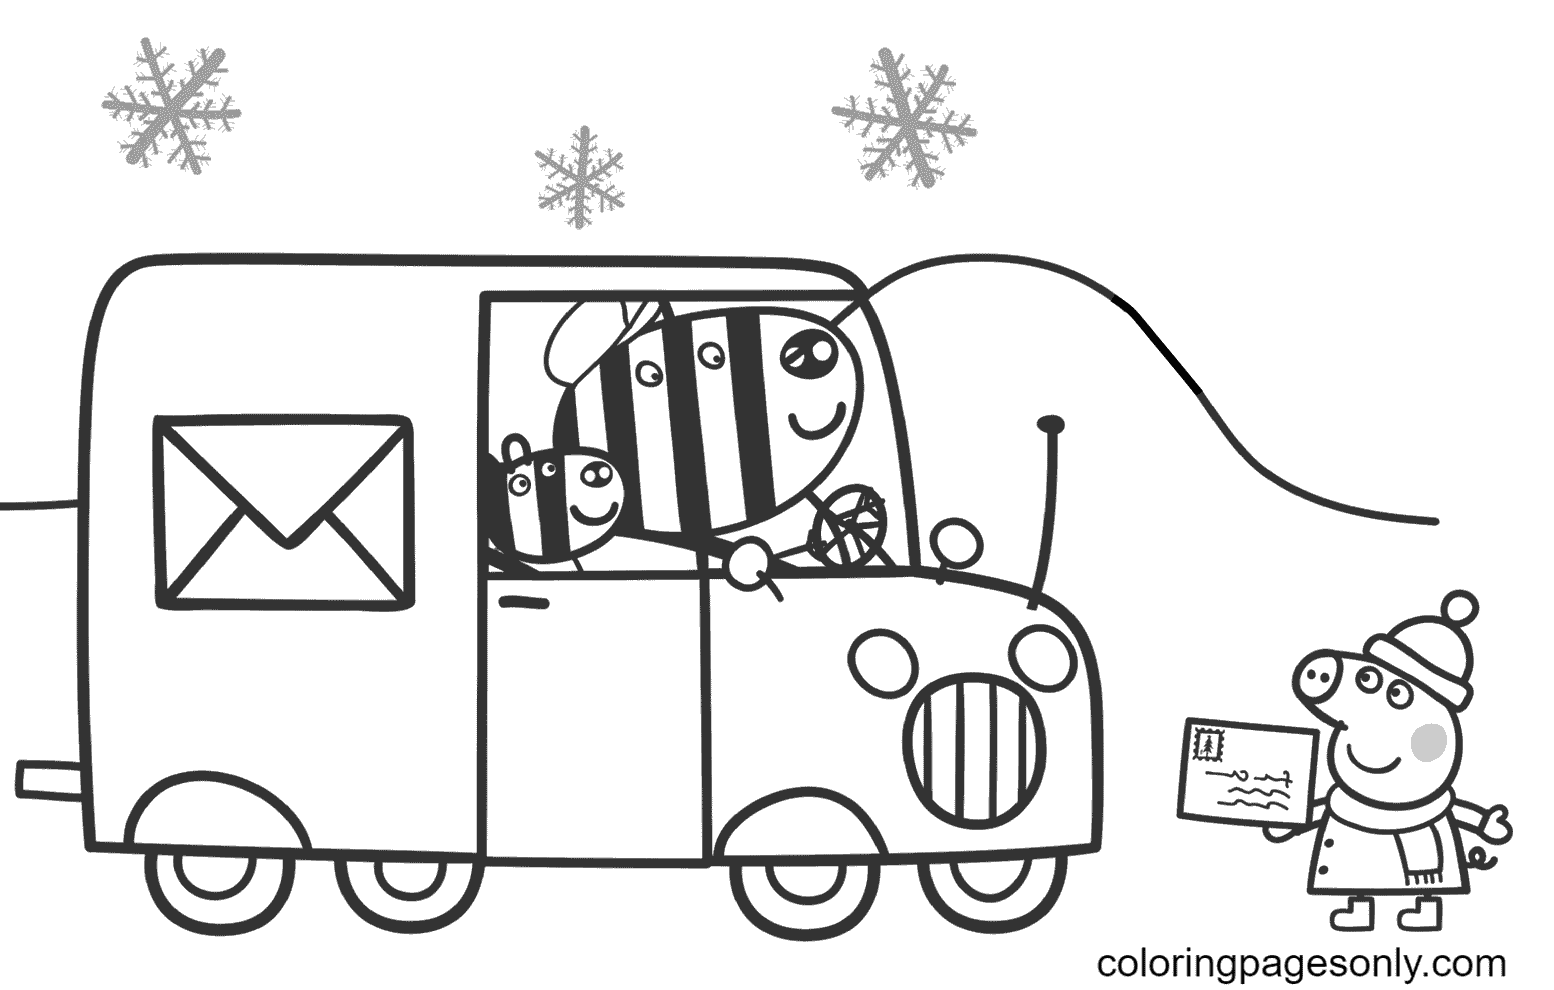 Peppa Waits for Zuzu and Zaza to Send a Xmas Card Coloring Page